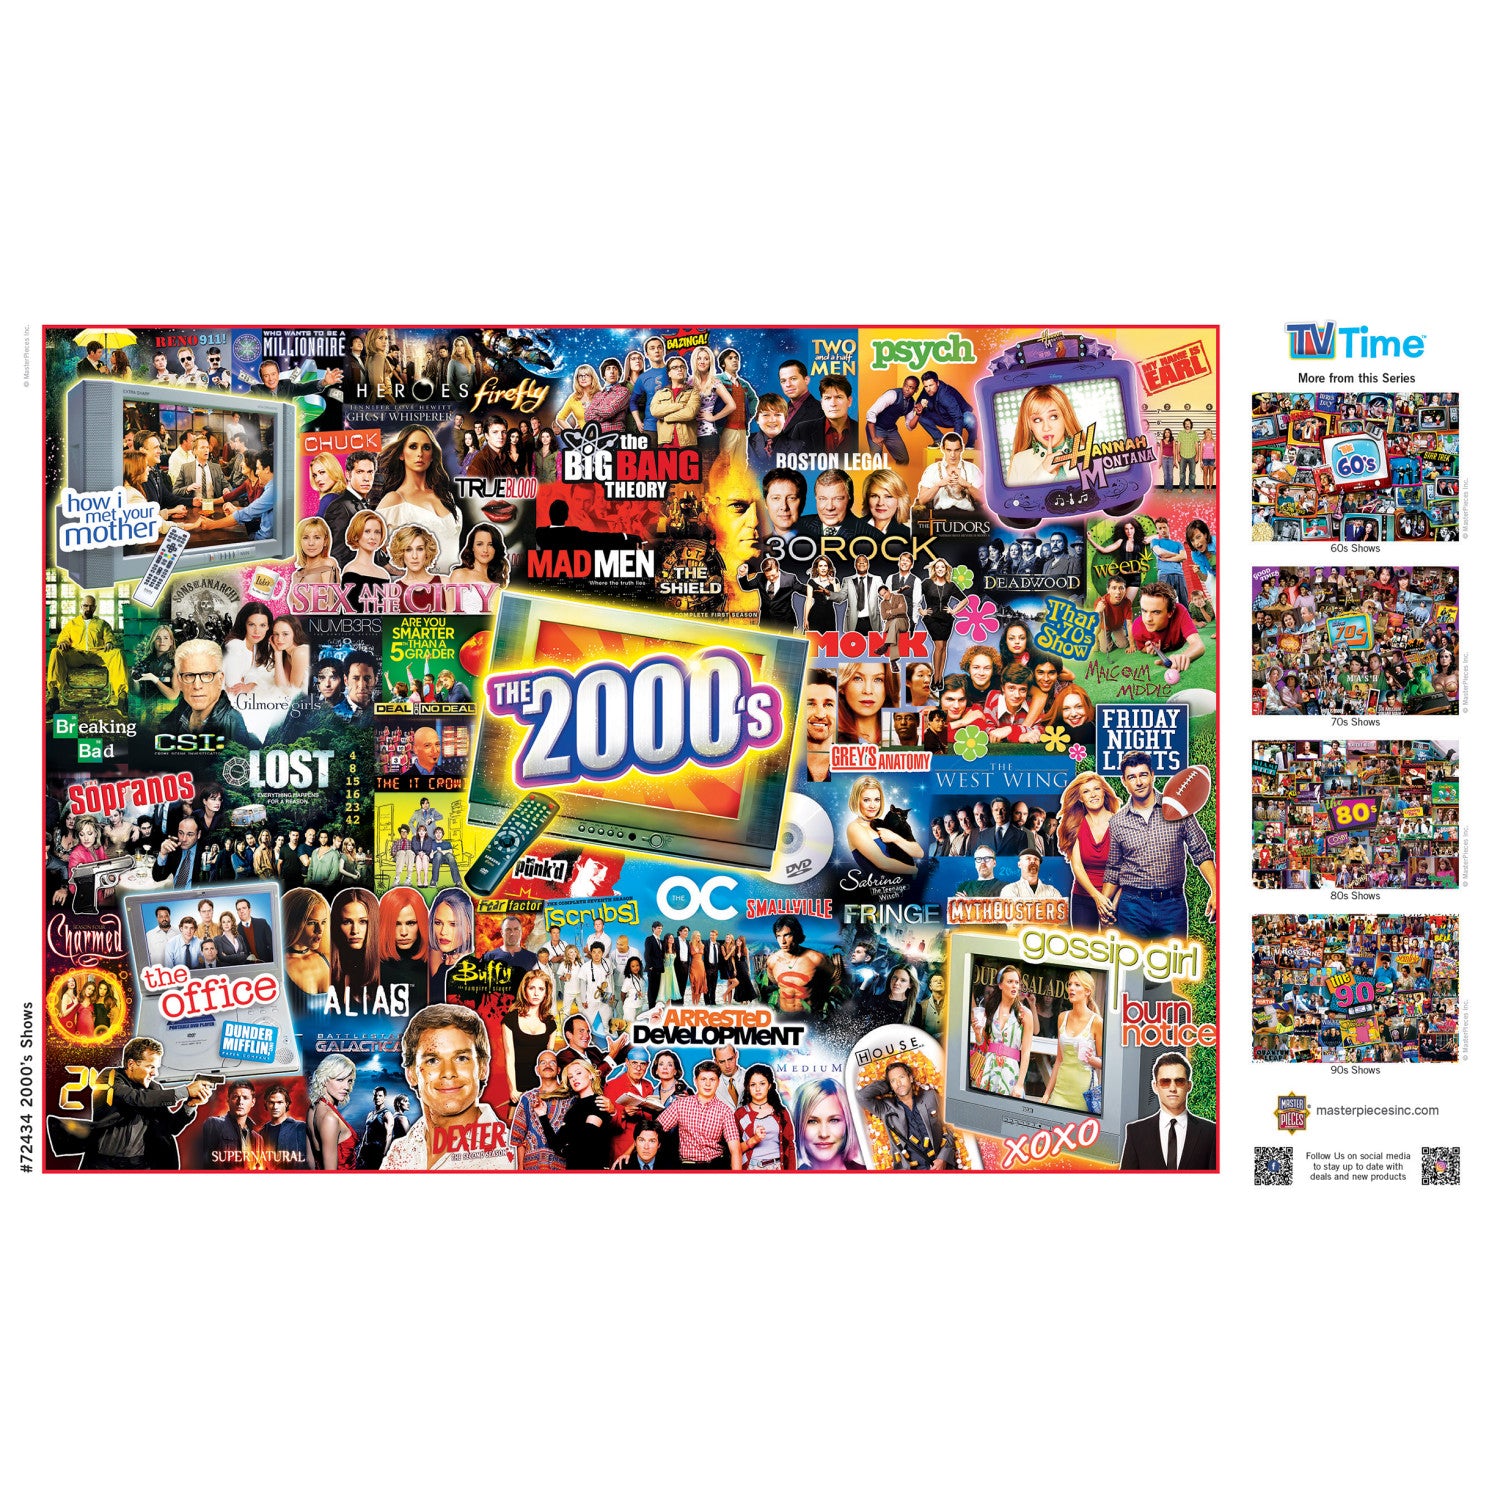 TV Time - 2000's Shows 1000 Piece Jigsaw Puzzle